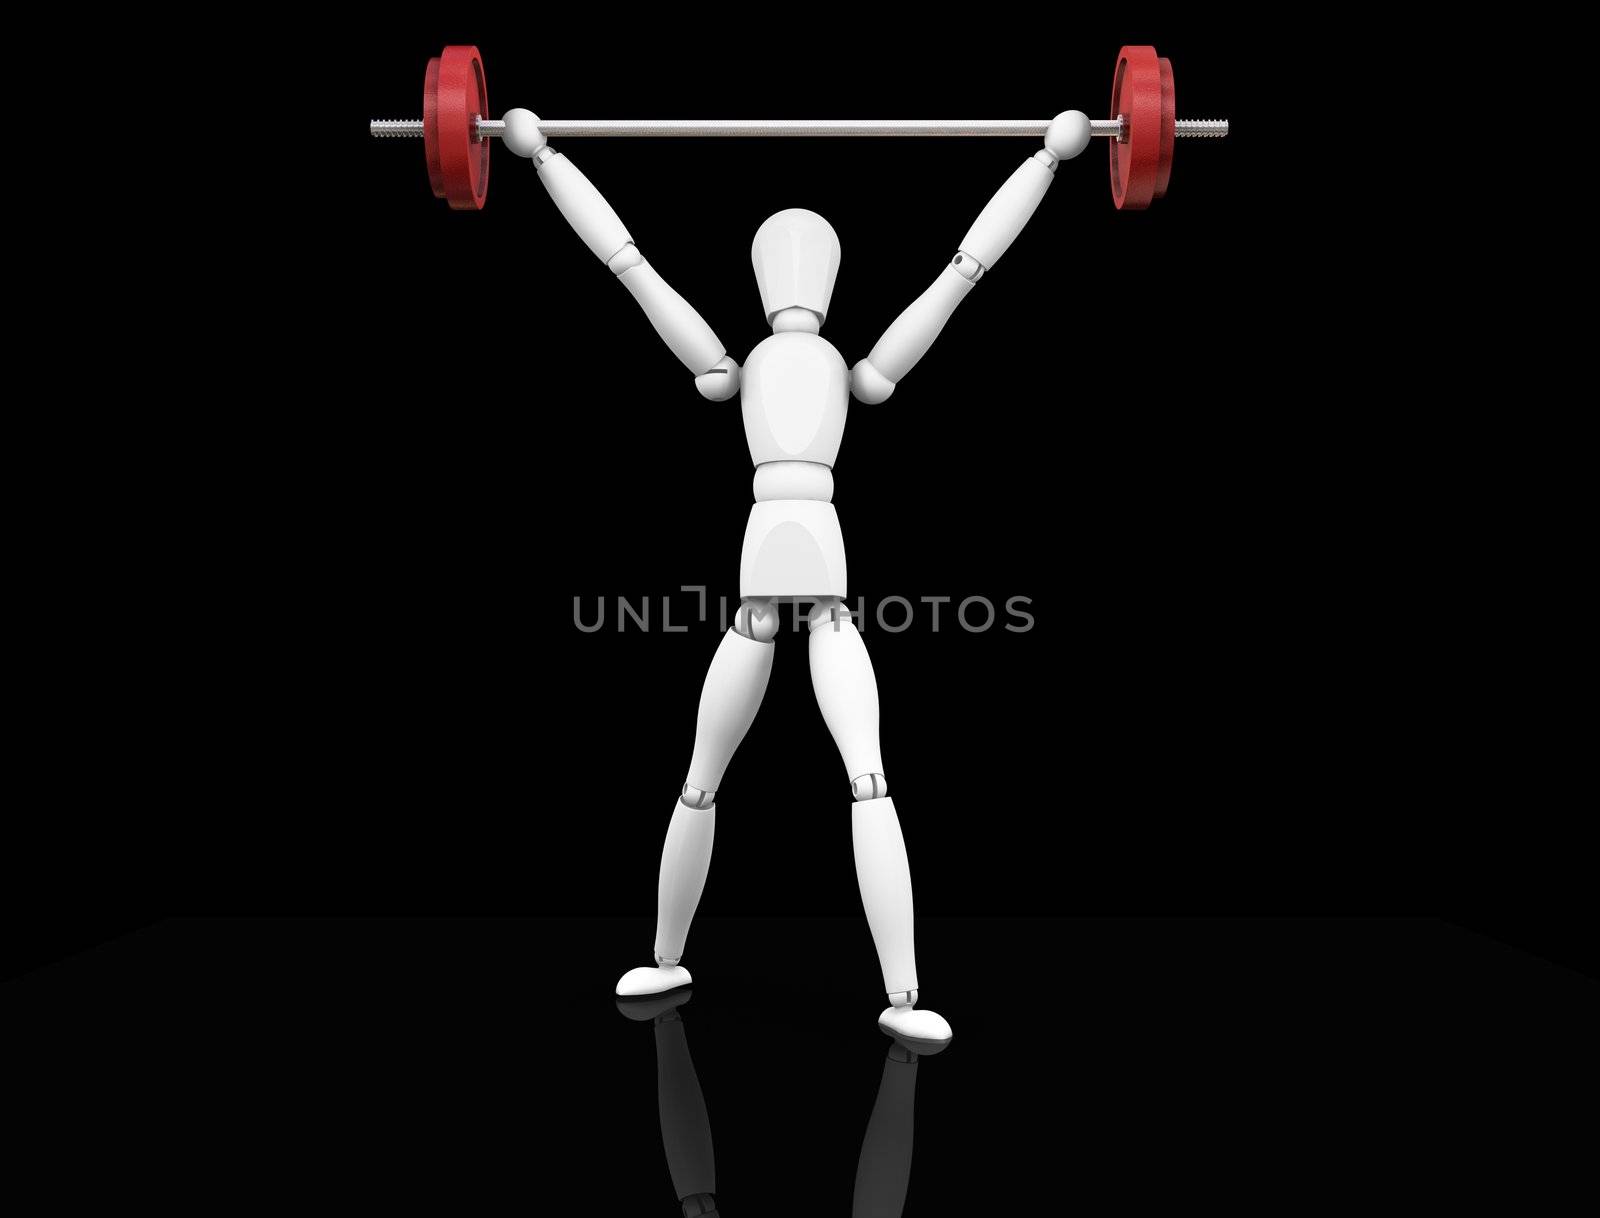 3D render of a man lifting weights